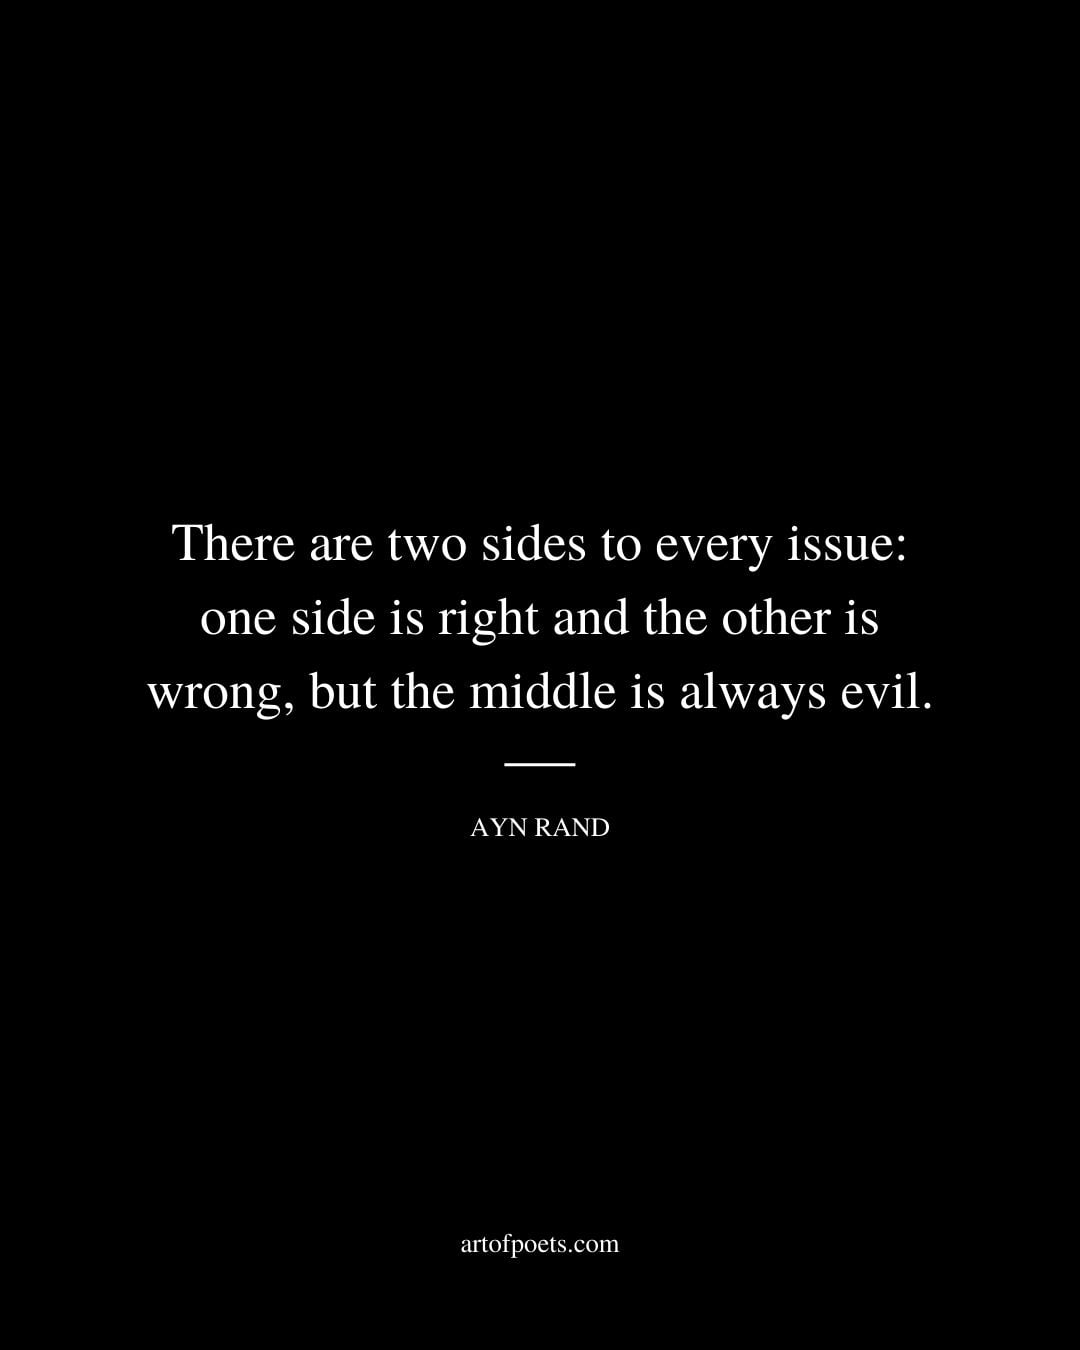 There are two sides to every issue one side is right and the other is wrong but the middle is always evil